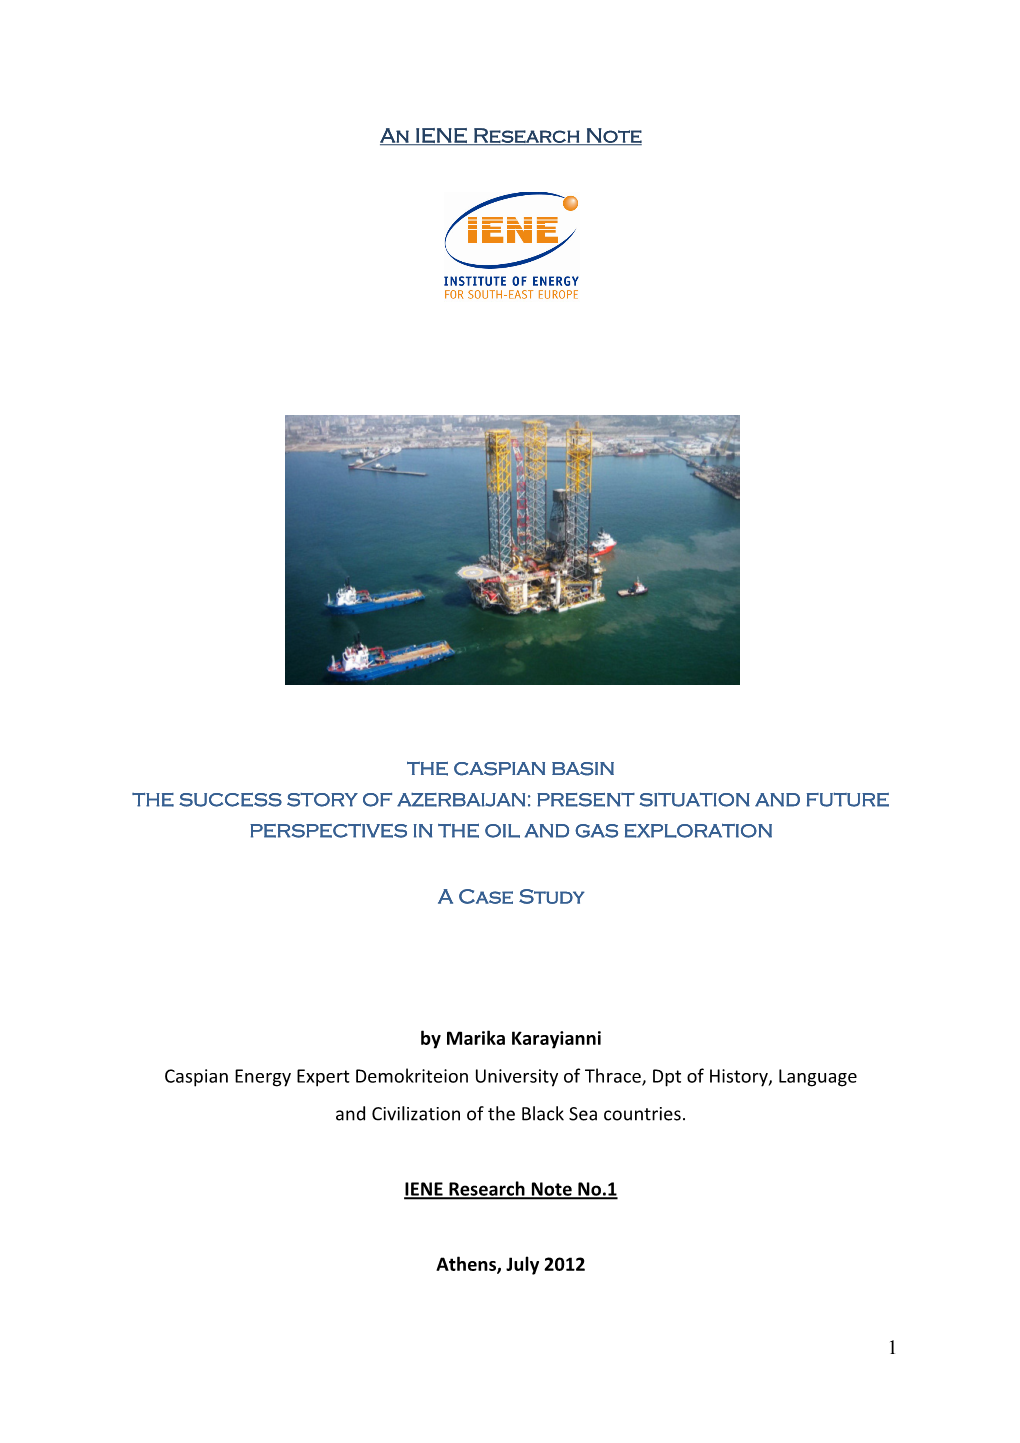 The Caspian Basin the Success Story of Azerbaijan: Present Situation and Future Perspectives in the Oil and Gas Exploration